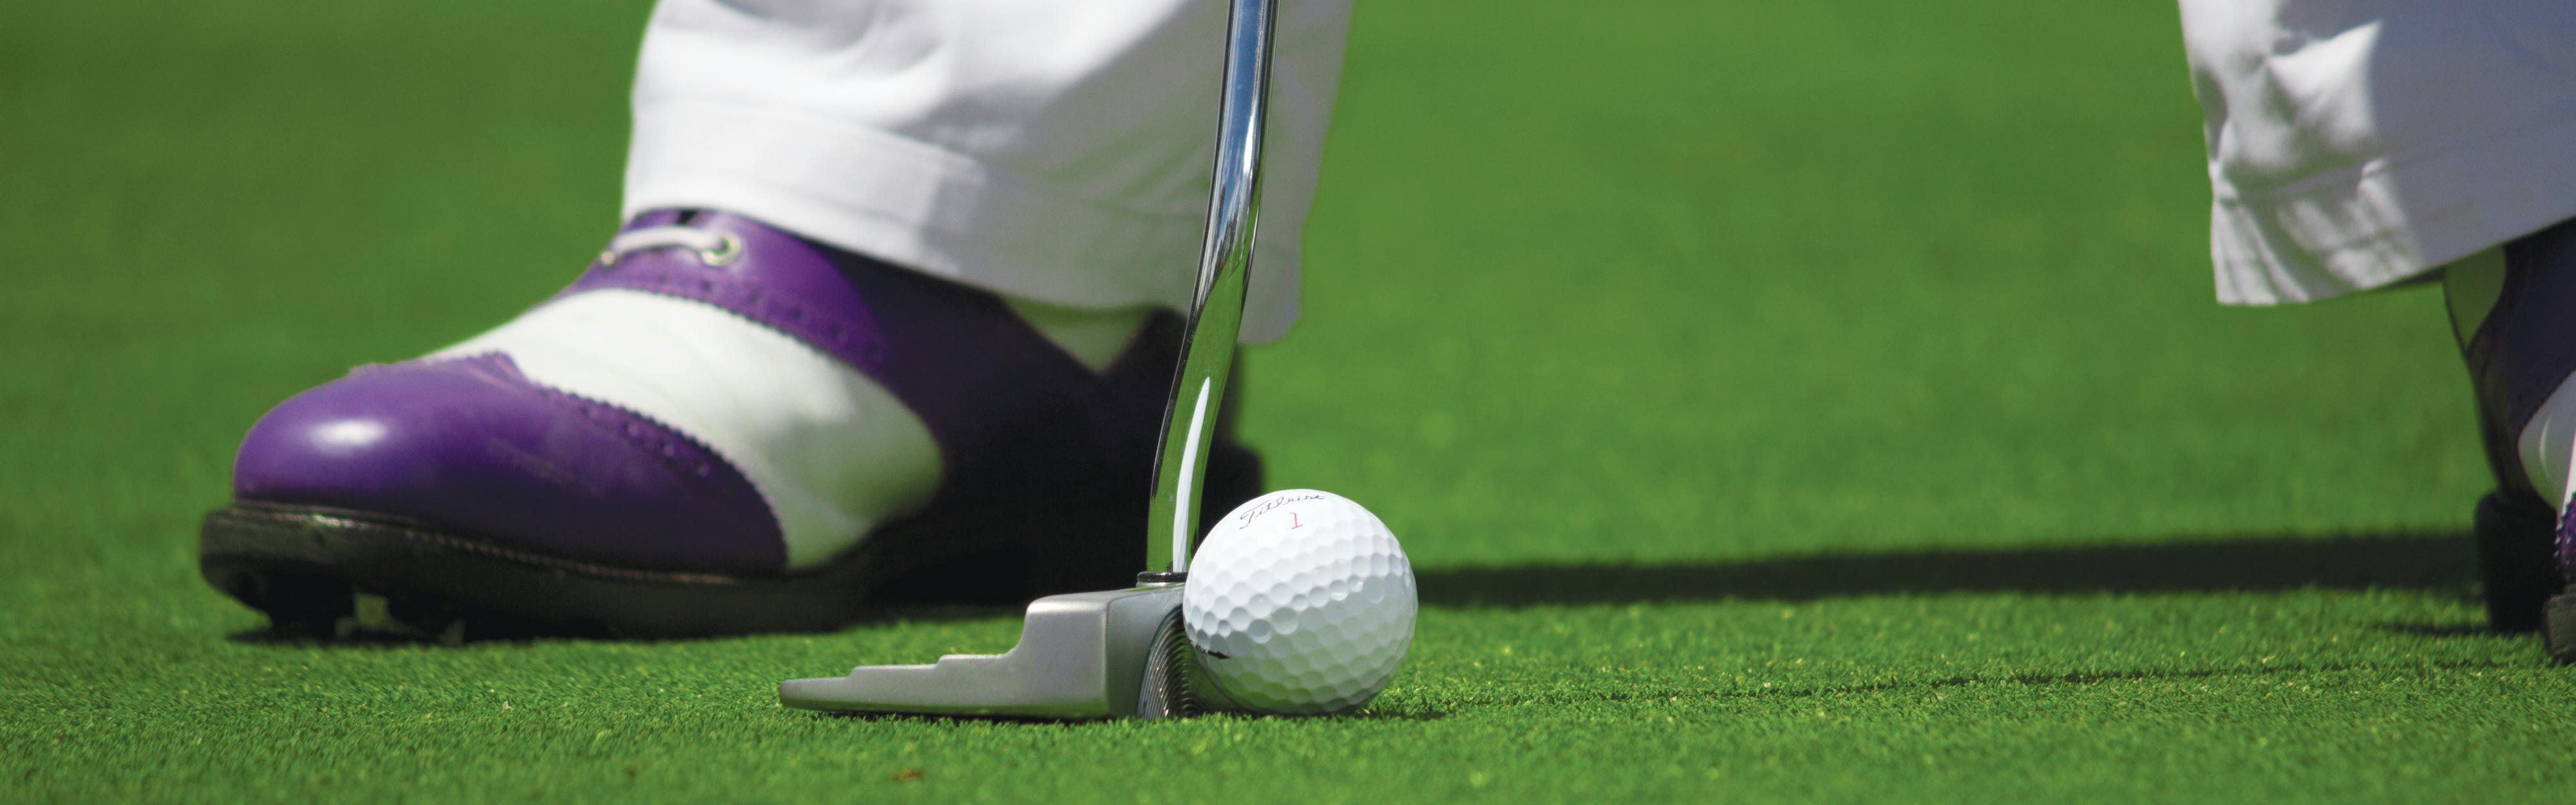 A purple and white golf shoe with a putter and white golf ball